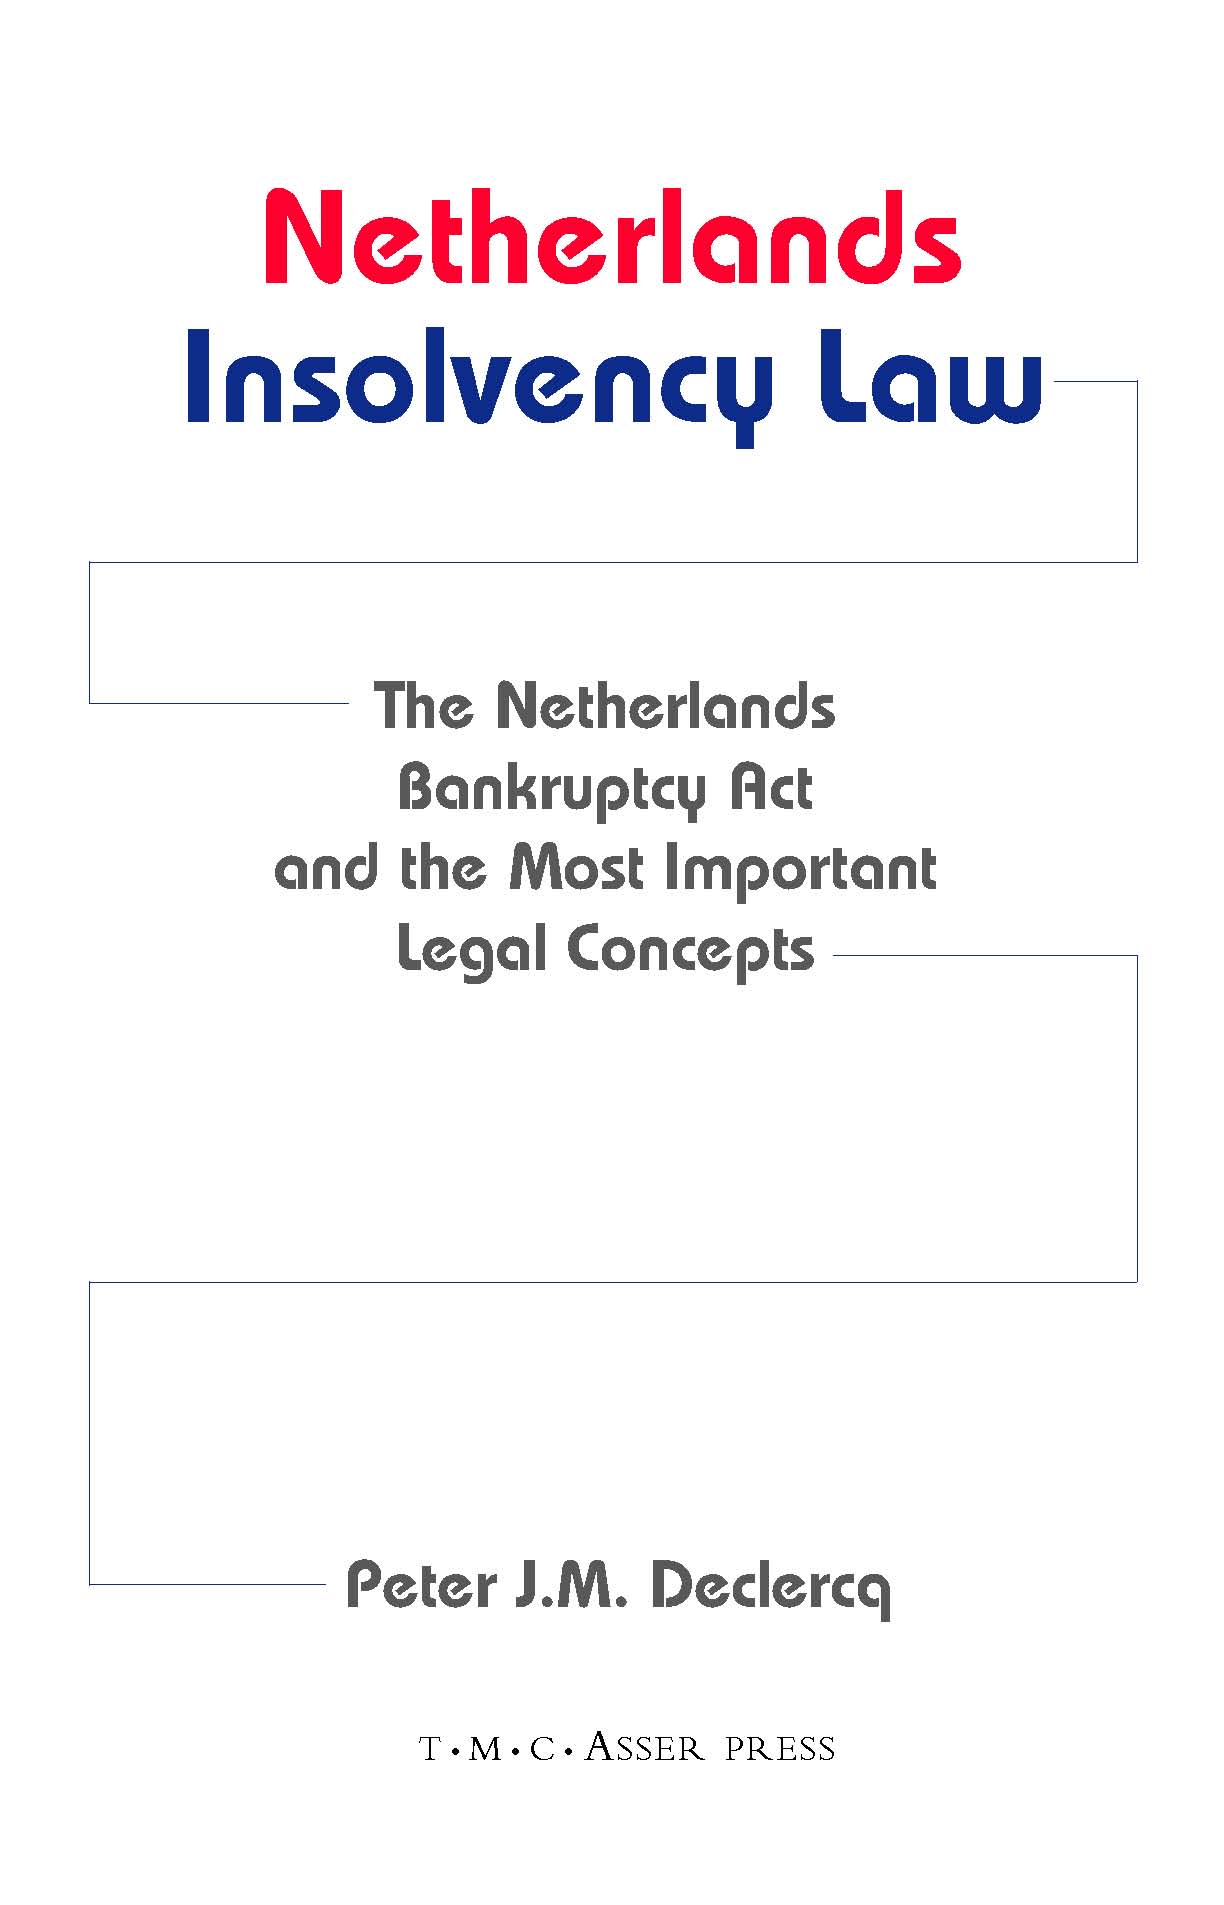 Netherlands Insolvency Law - The Netherlands Bankruptcy Act and the Most Important Legal Concepts